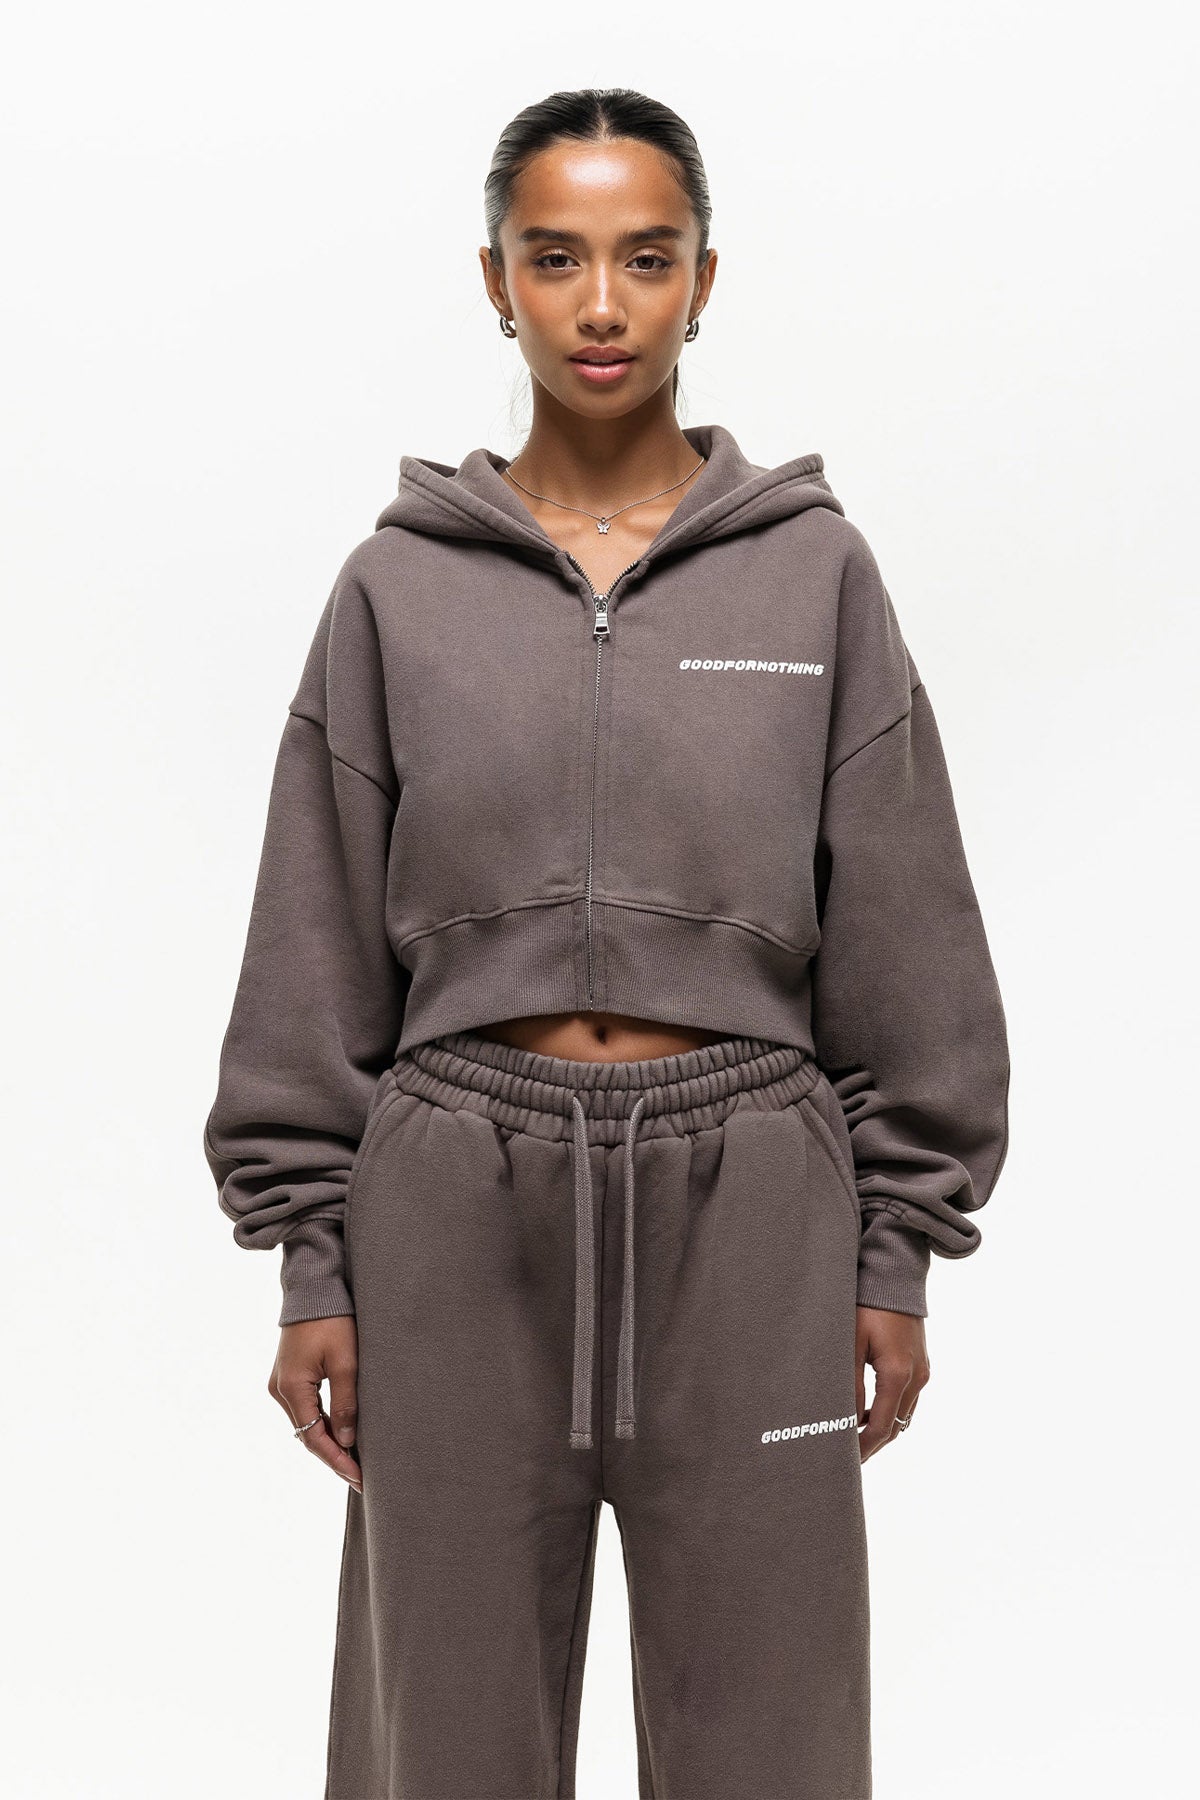 WOMEN'S TRACKSUITS – GOODFORNOTHING®